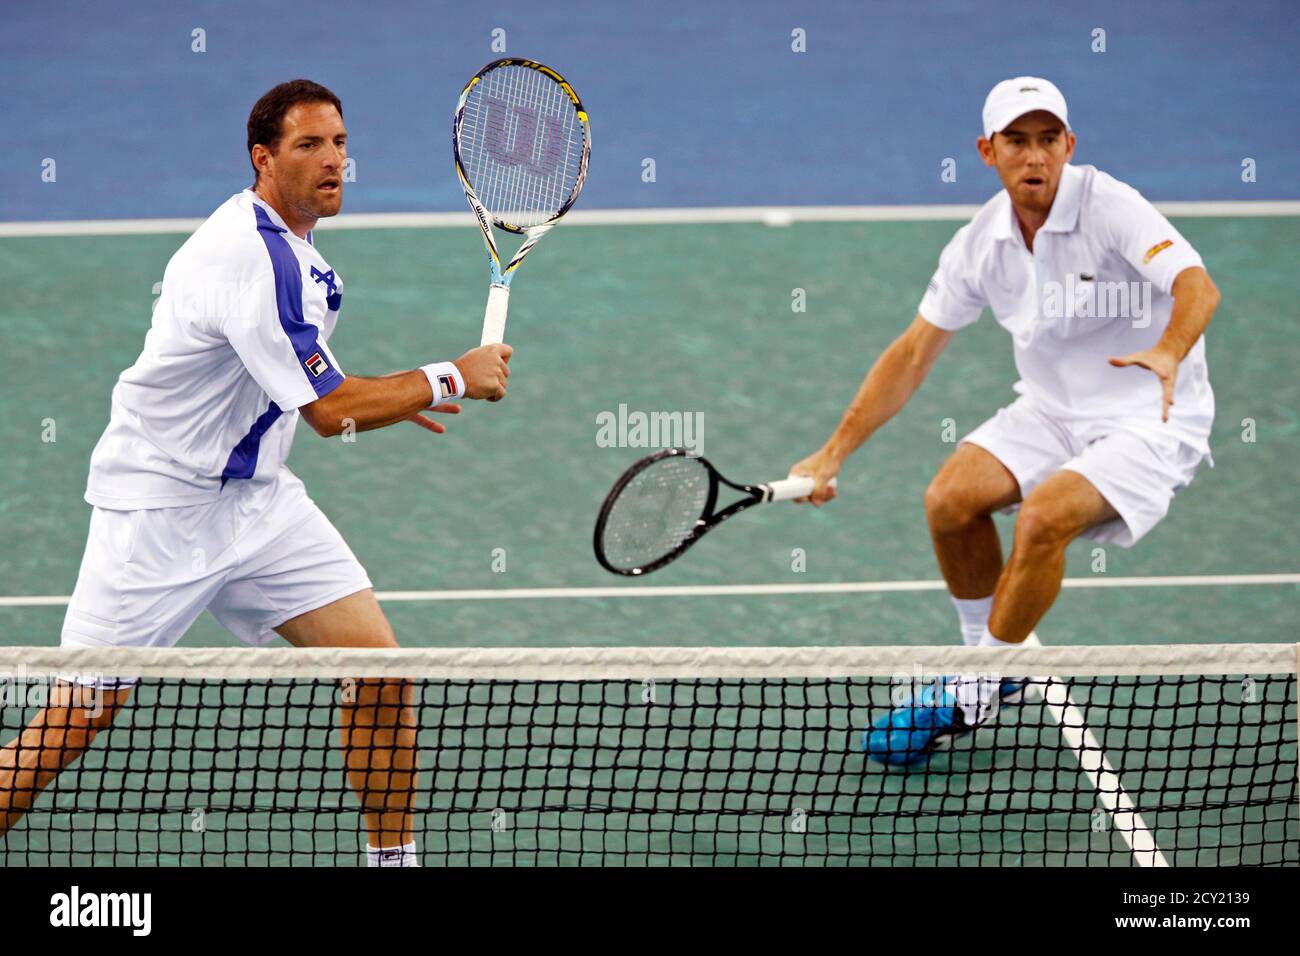 Jonathan Erlich (L) and Dudi Sela (R) of Israel play against Michael Llodra  and Julien Benneteau of France in their men's doubles first round Davis Cup  tennis match in Rouen, February 2,